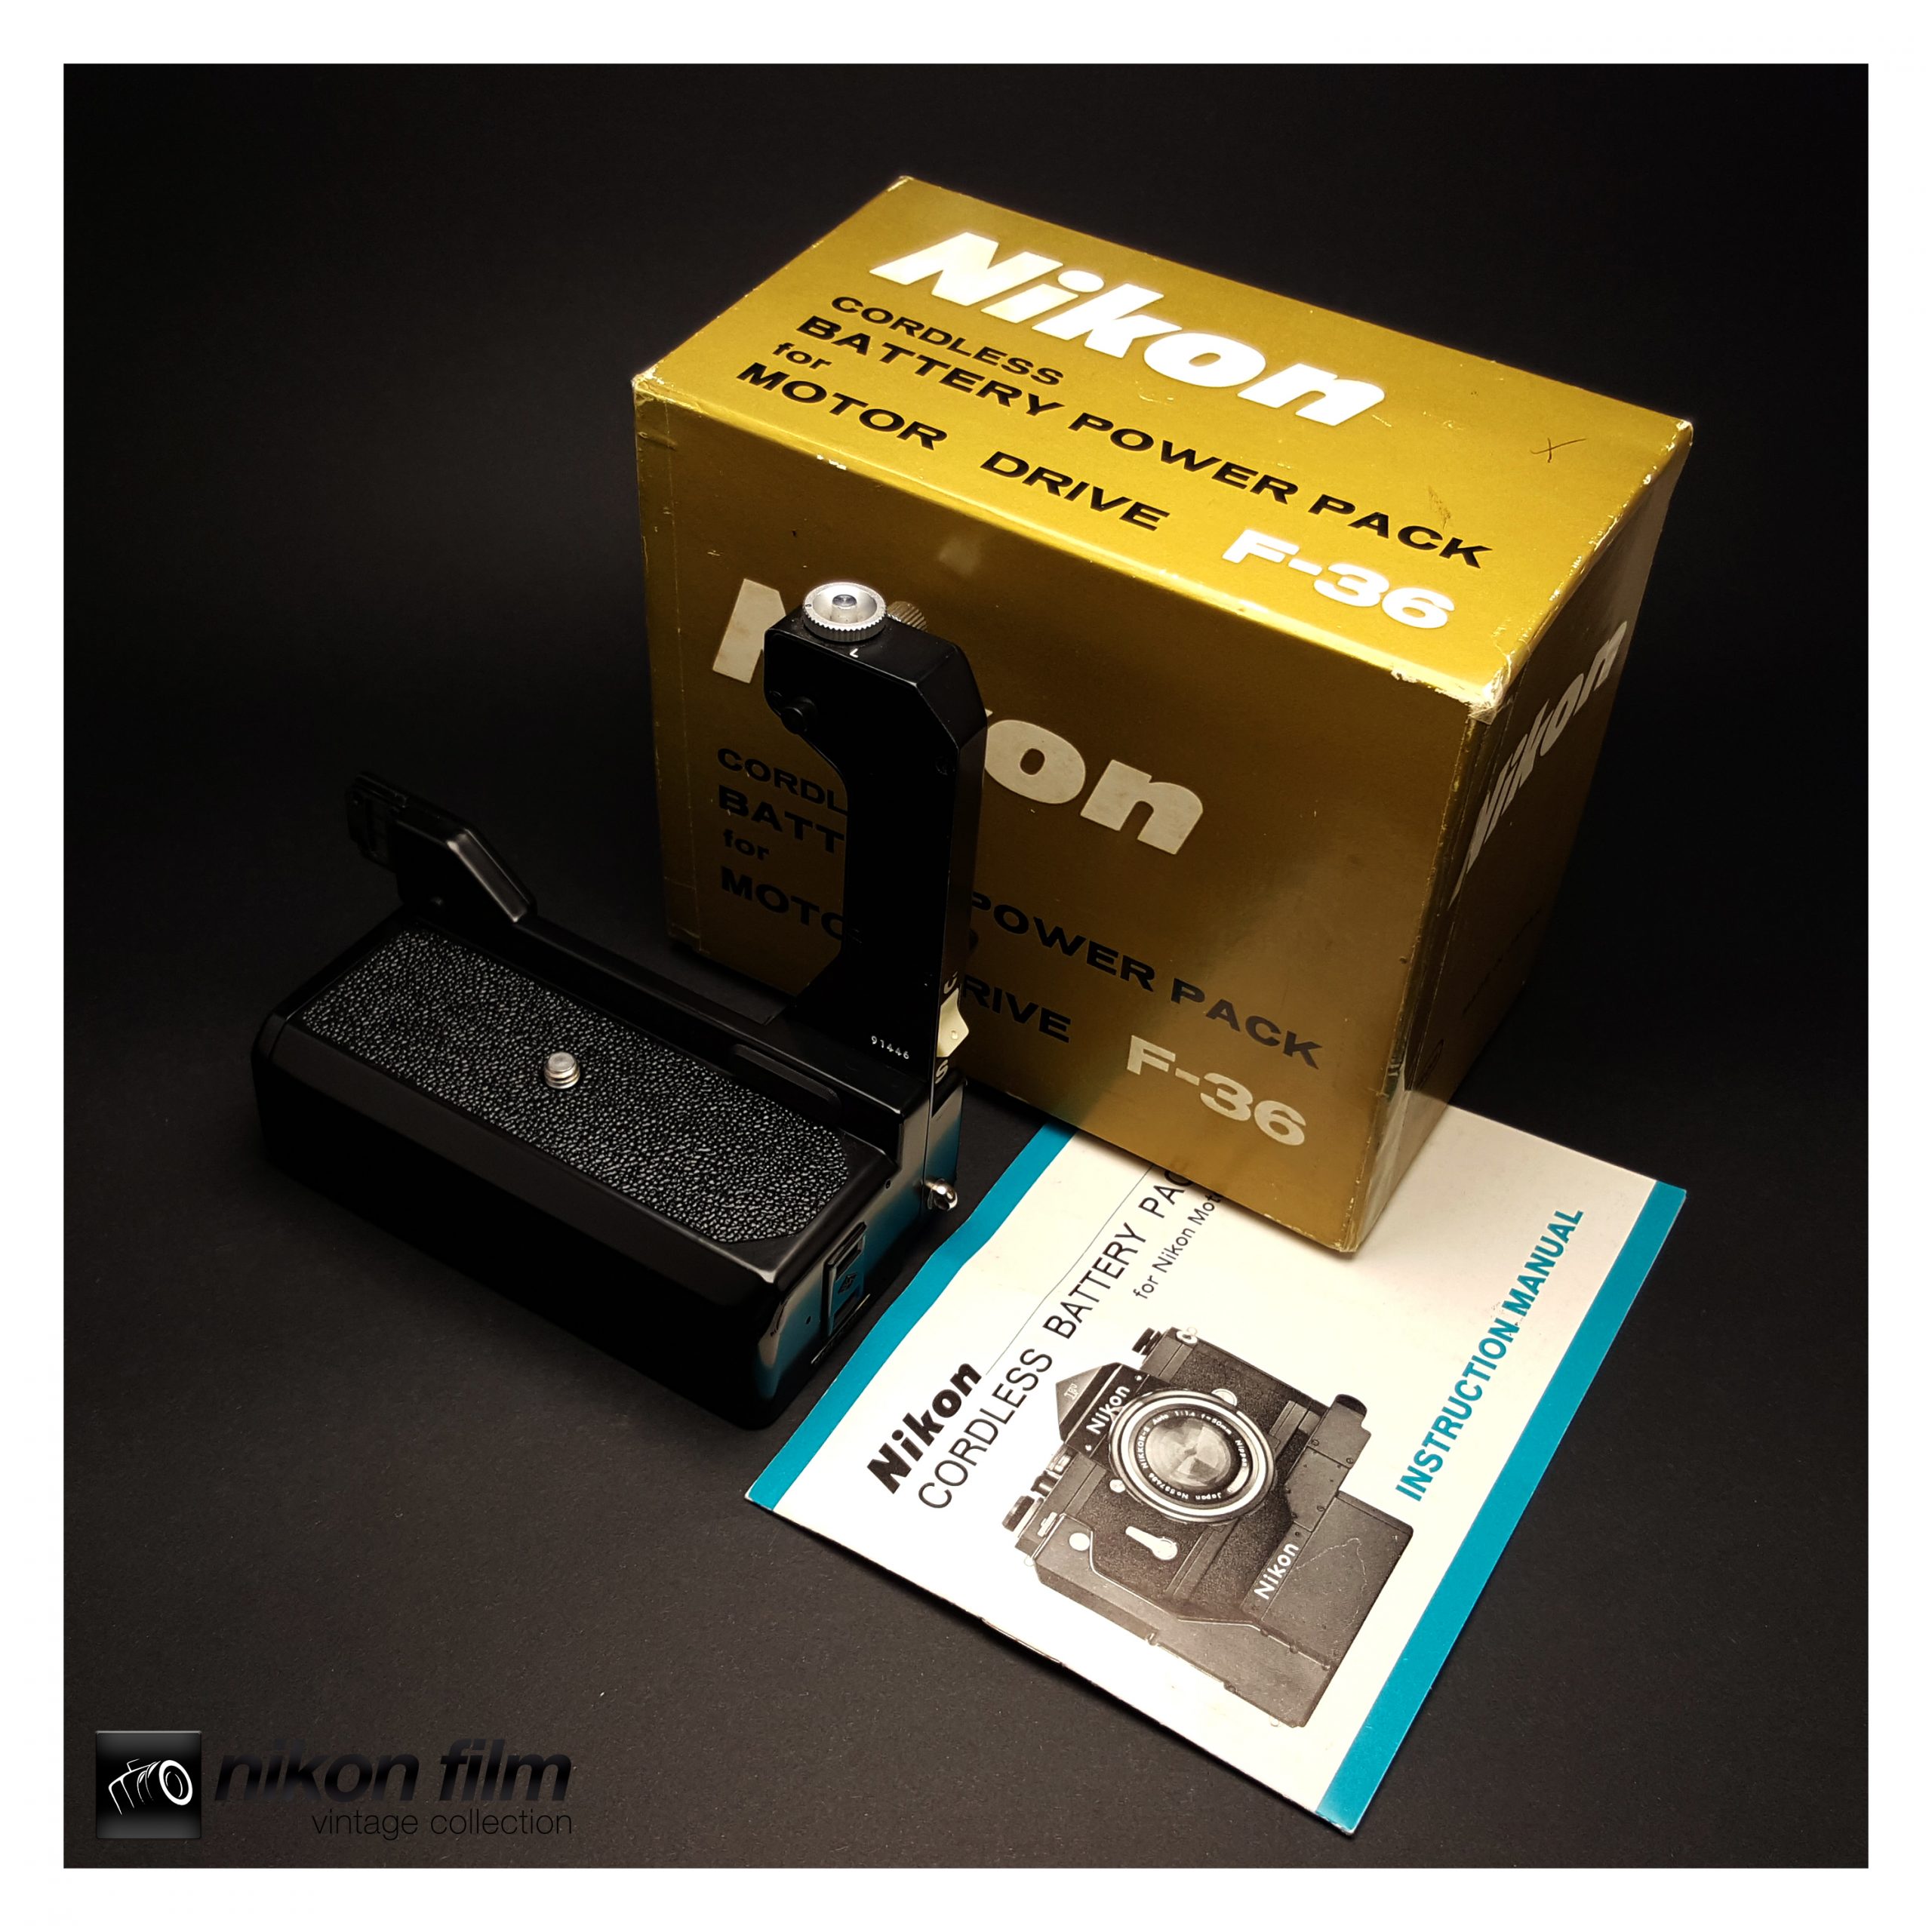 Nikon Cordless Battery Pack for F-36 Motor Drive - Boxed